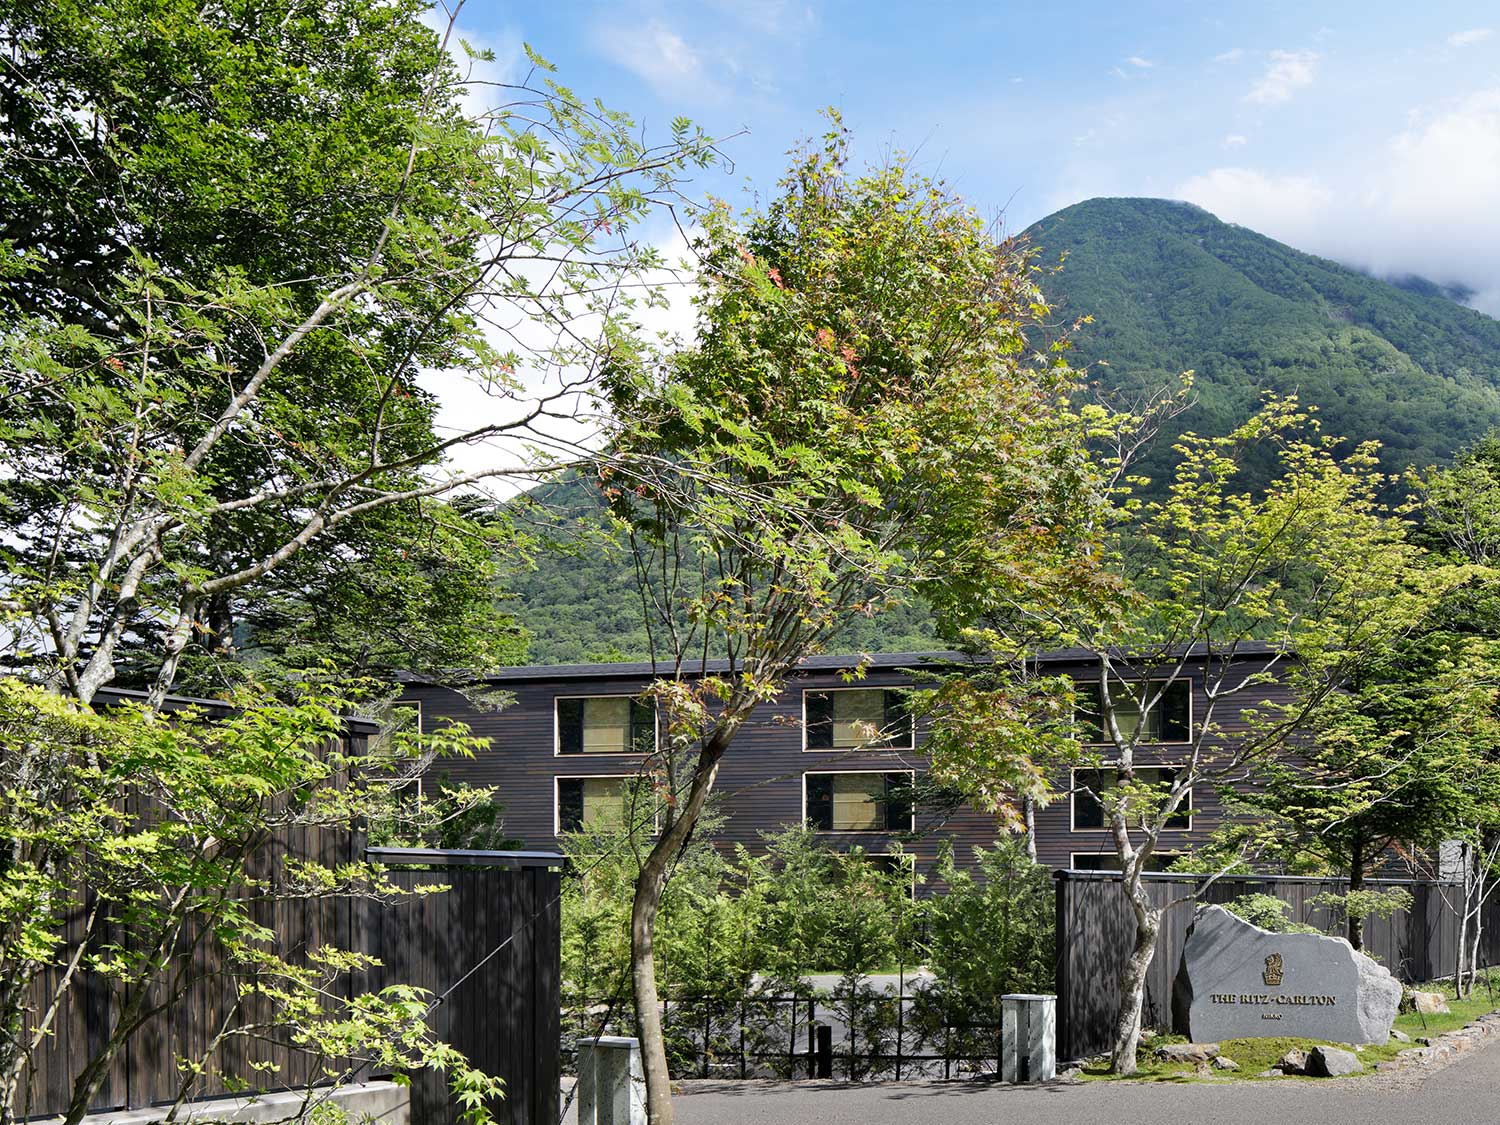 The exterior view of the entrance to The Ritz-Carlton, Nikko, in Japan.